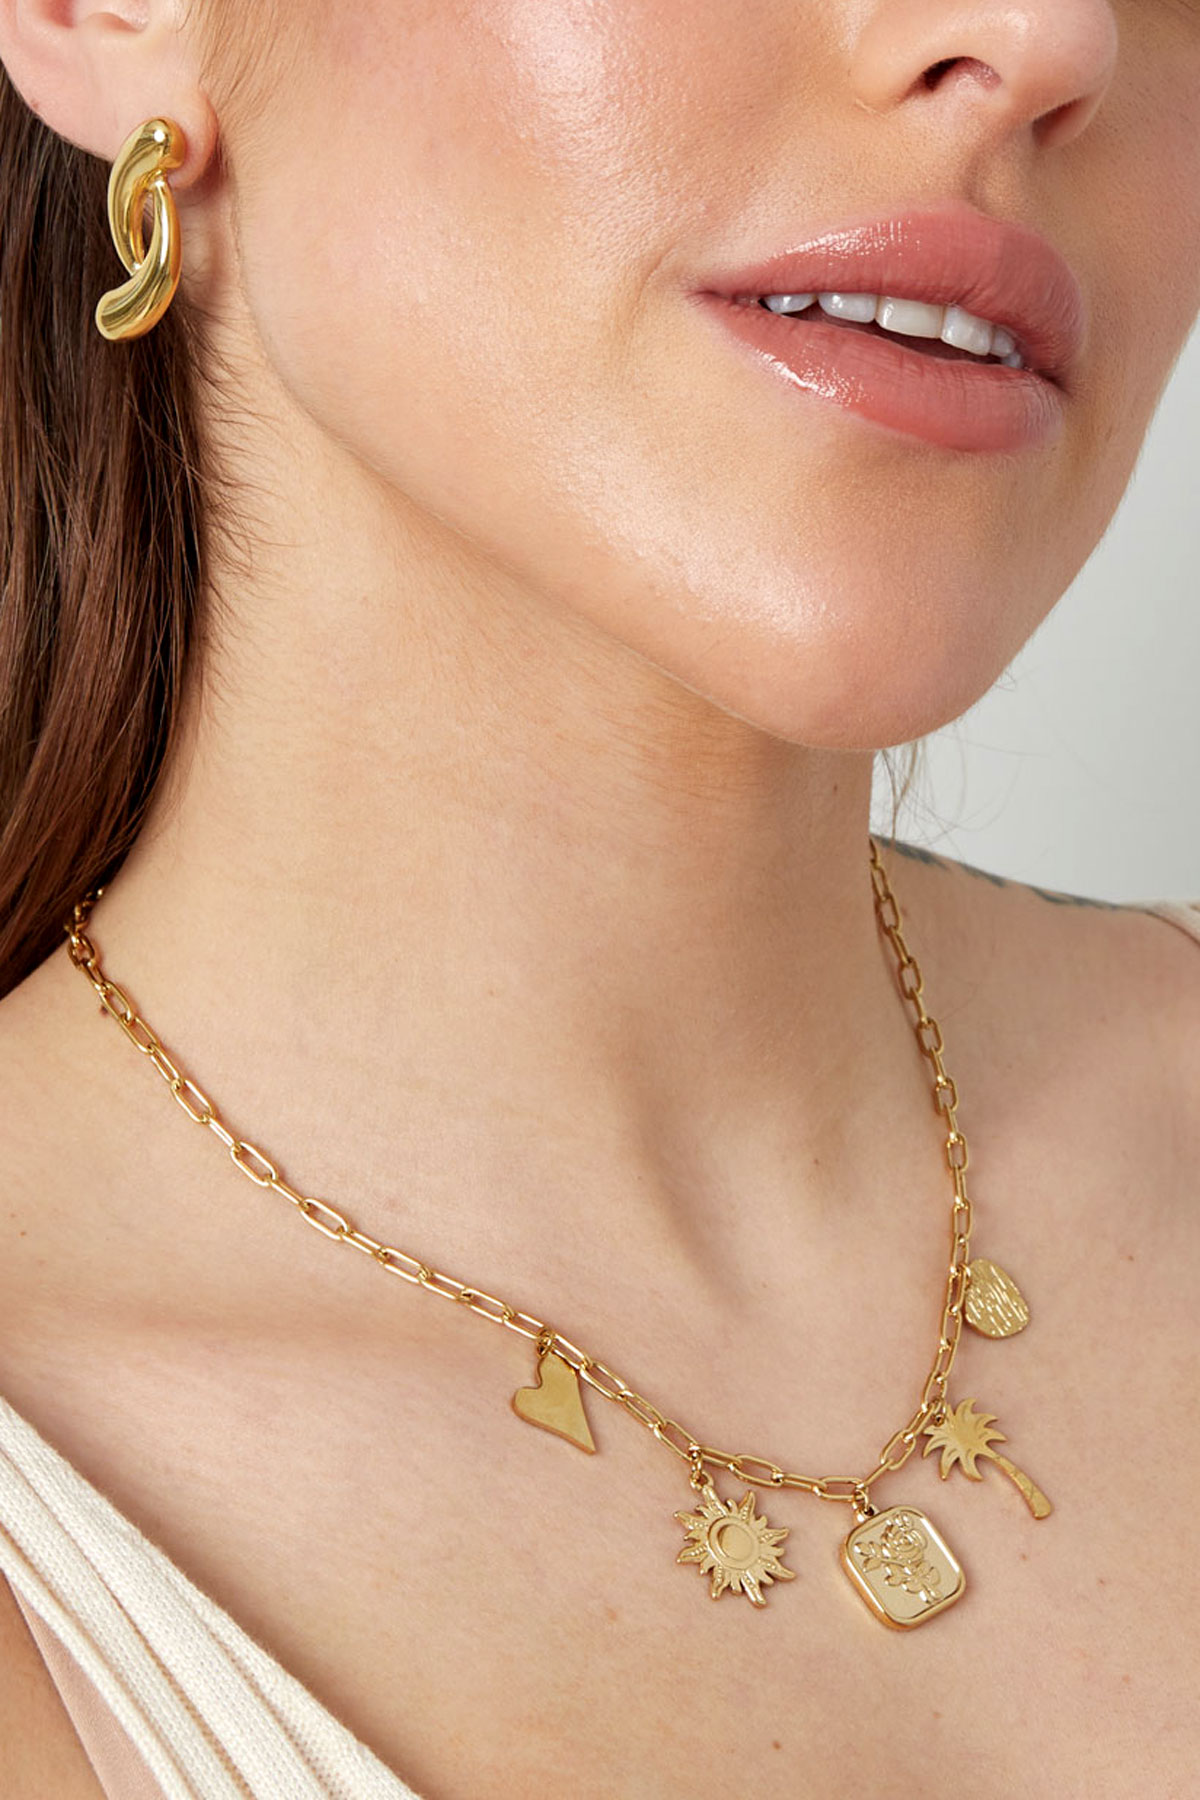 Bedelketting palm possesion - goud Afbeelding3